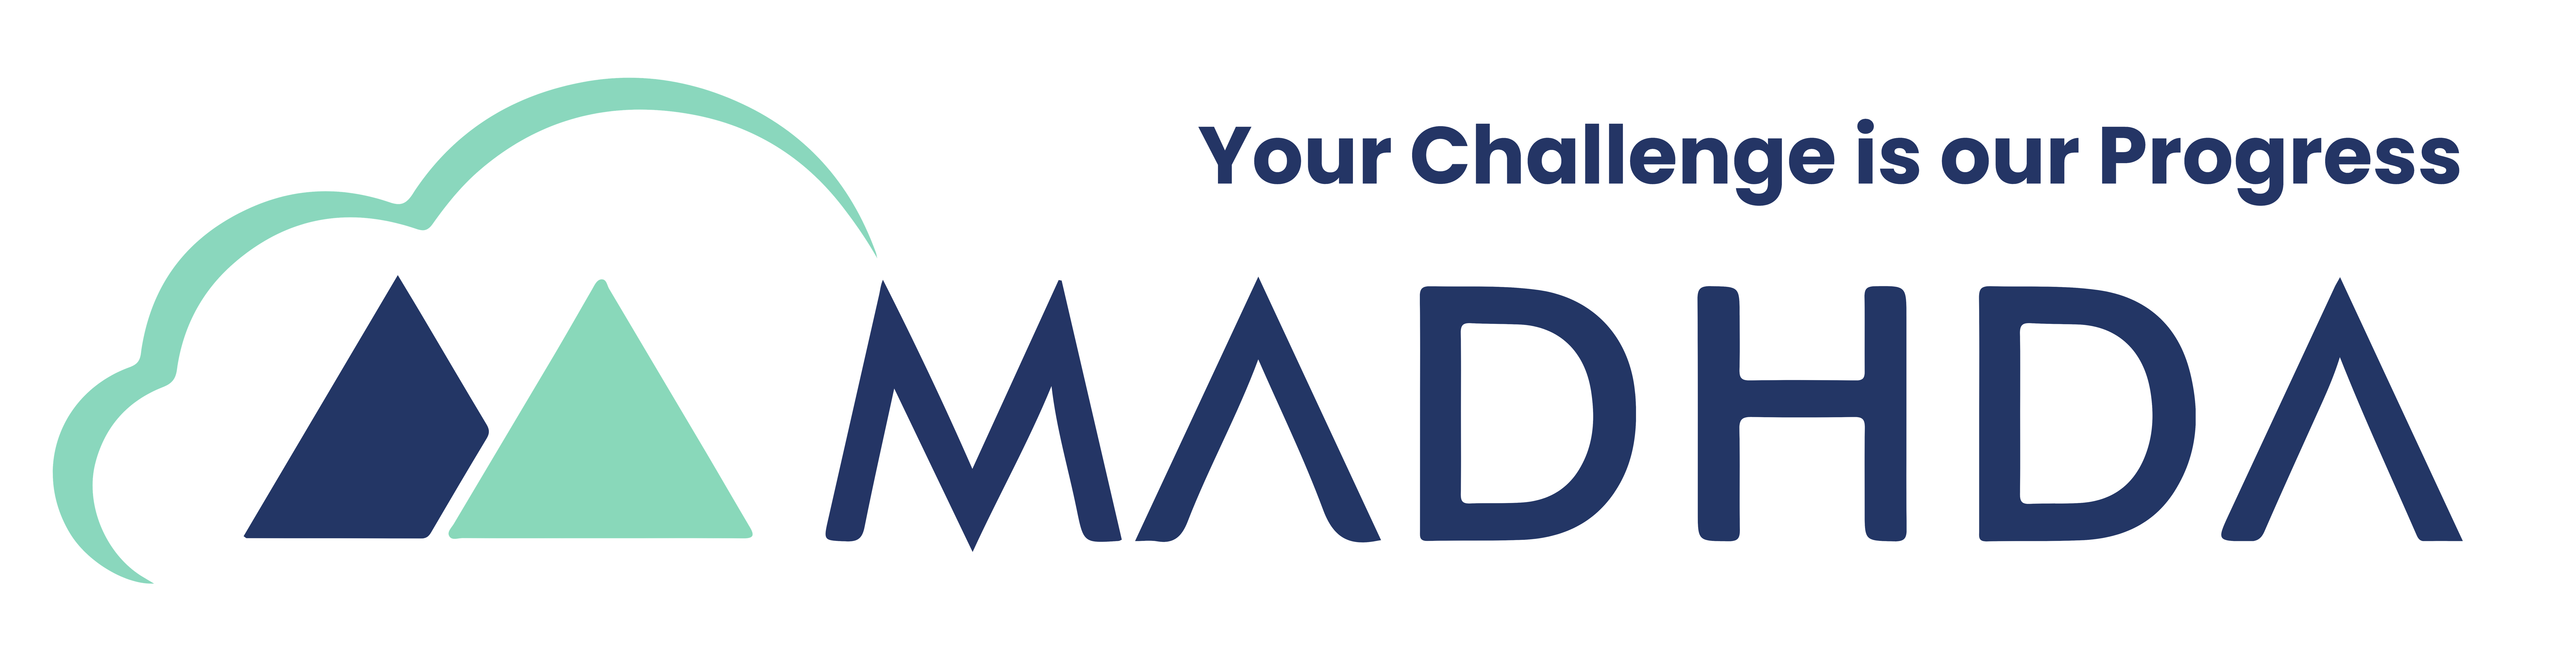 MADHDA Business Solutions - a Microsoft Partner